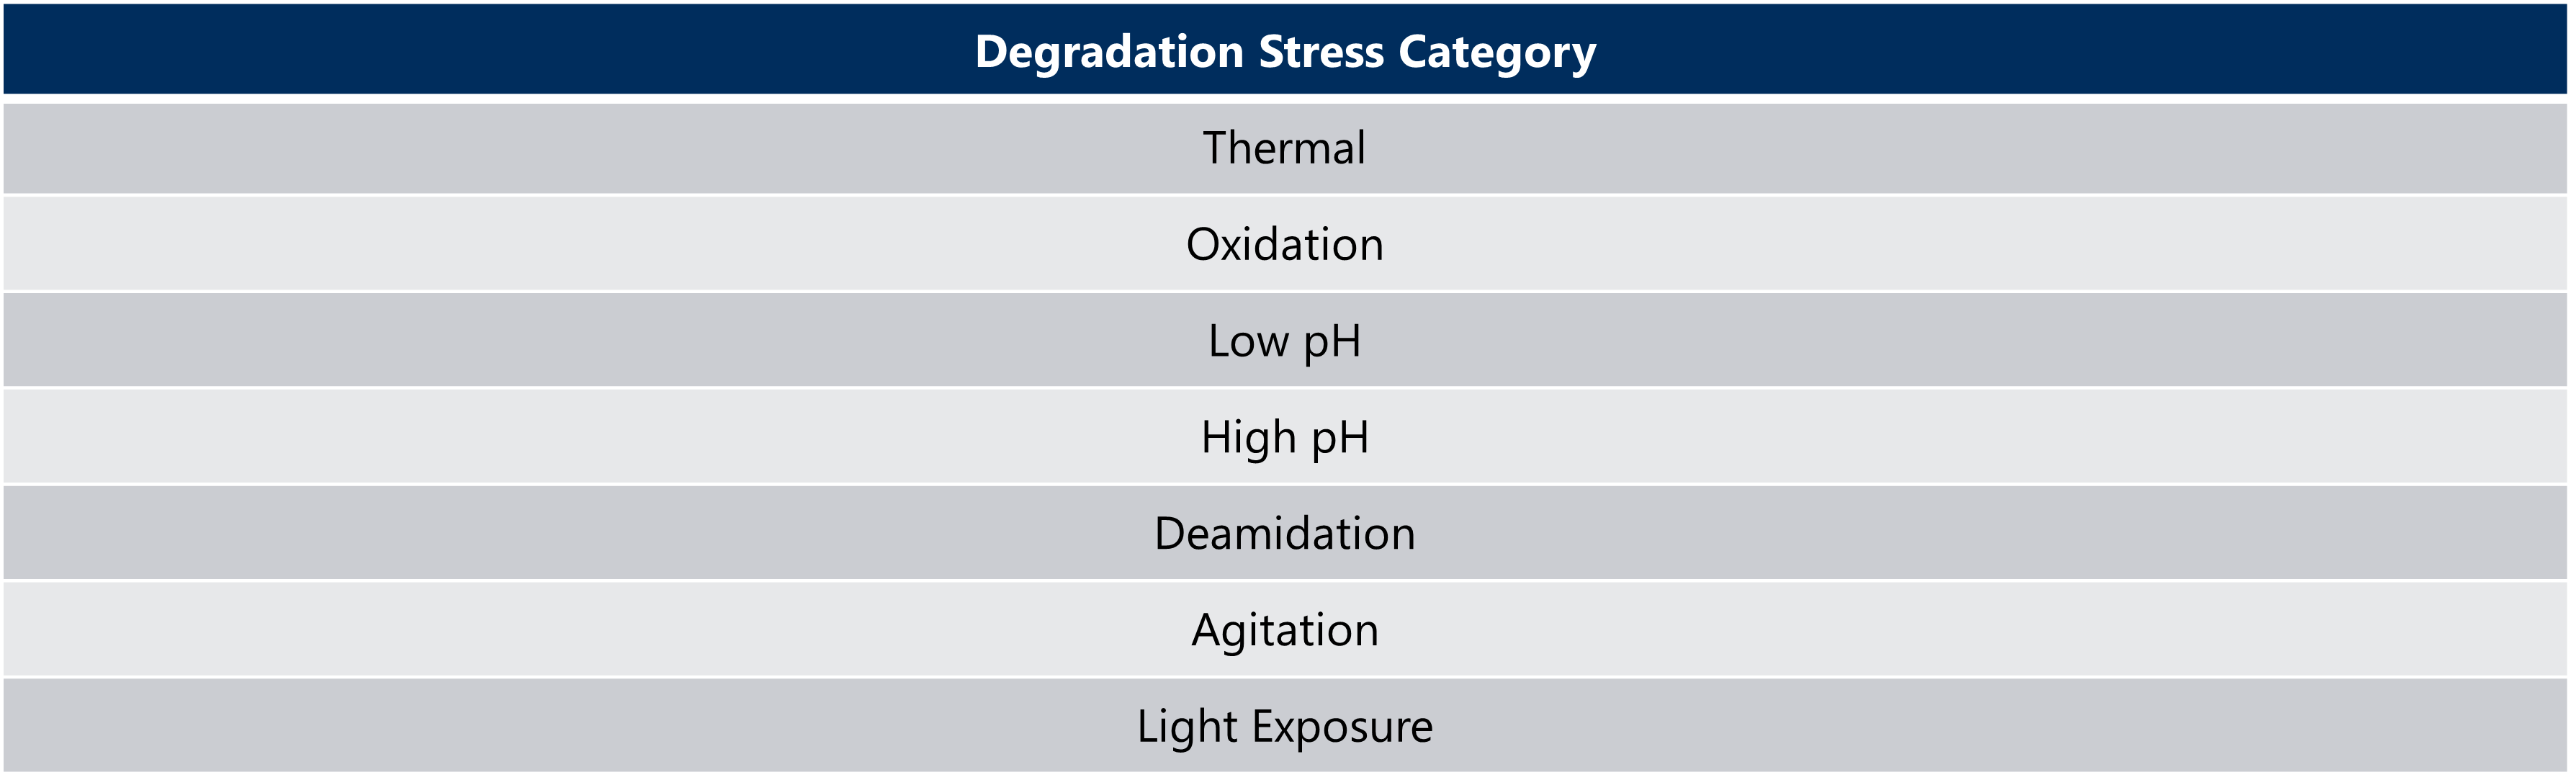 Types of Forced Degradation Stress